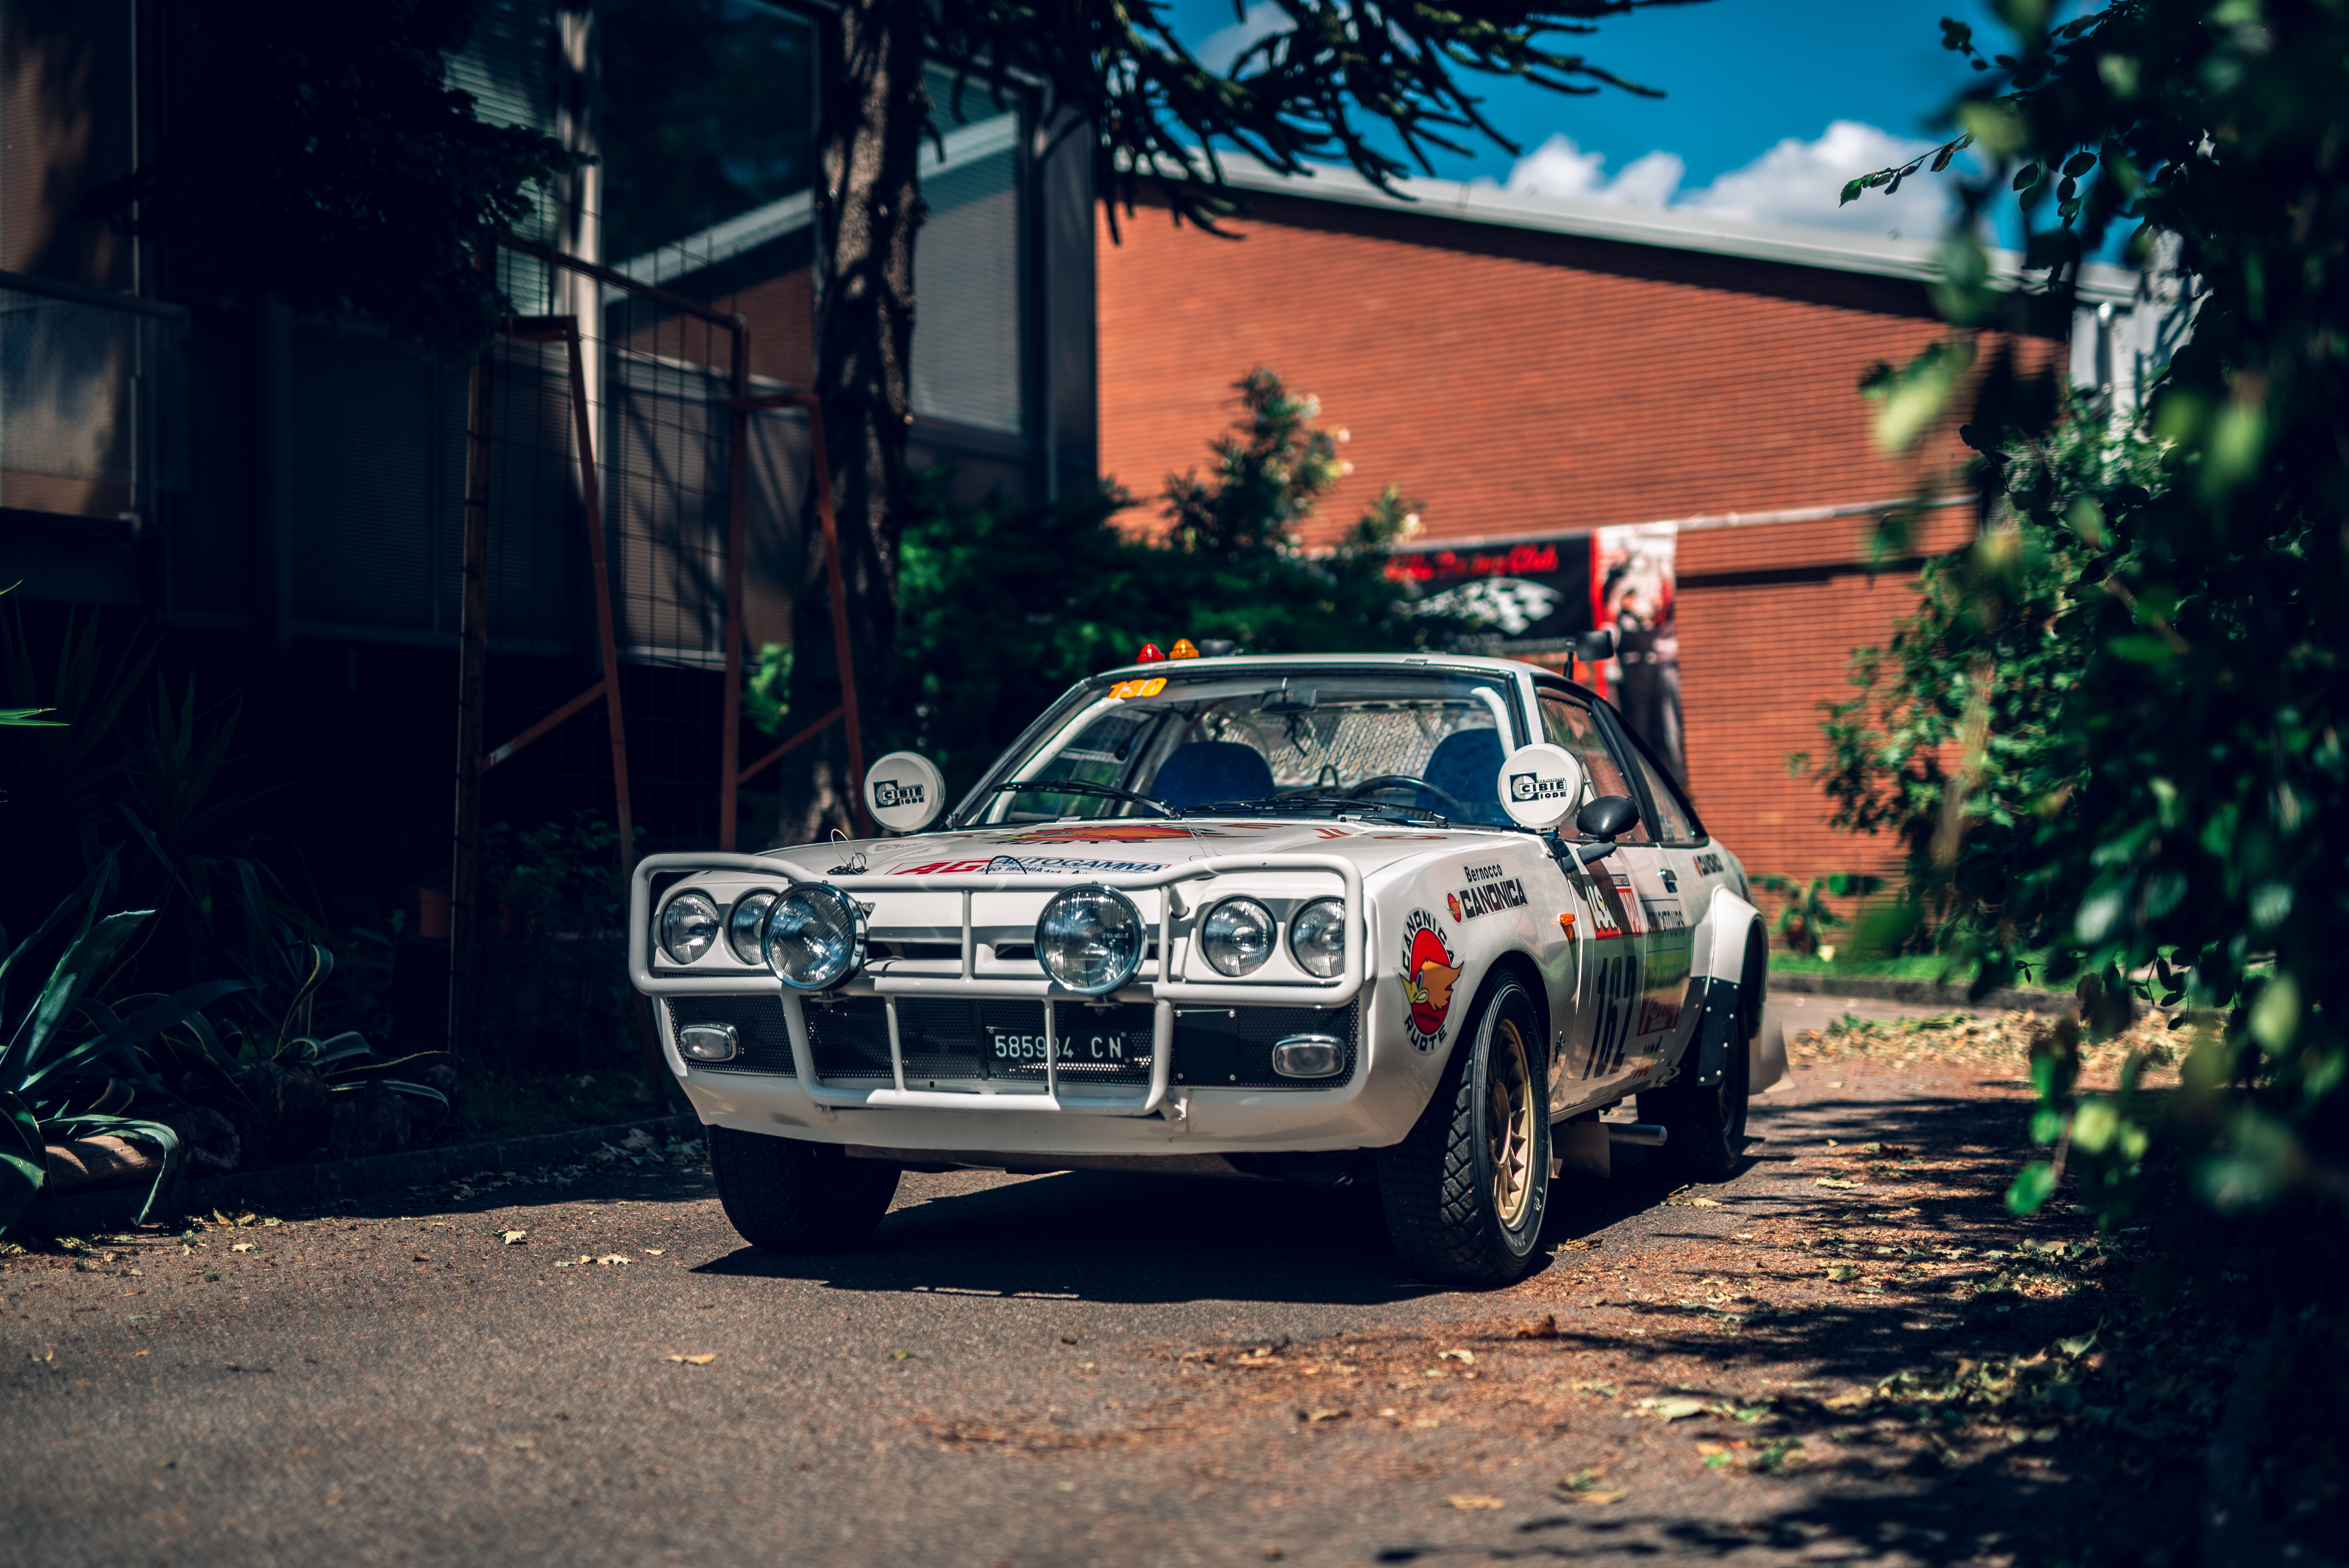 1976 OPEL MANTA RALLY CAR for sale by auction in Milan, Italy